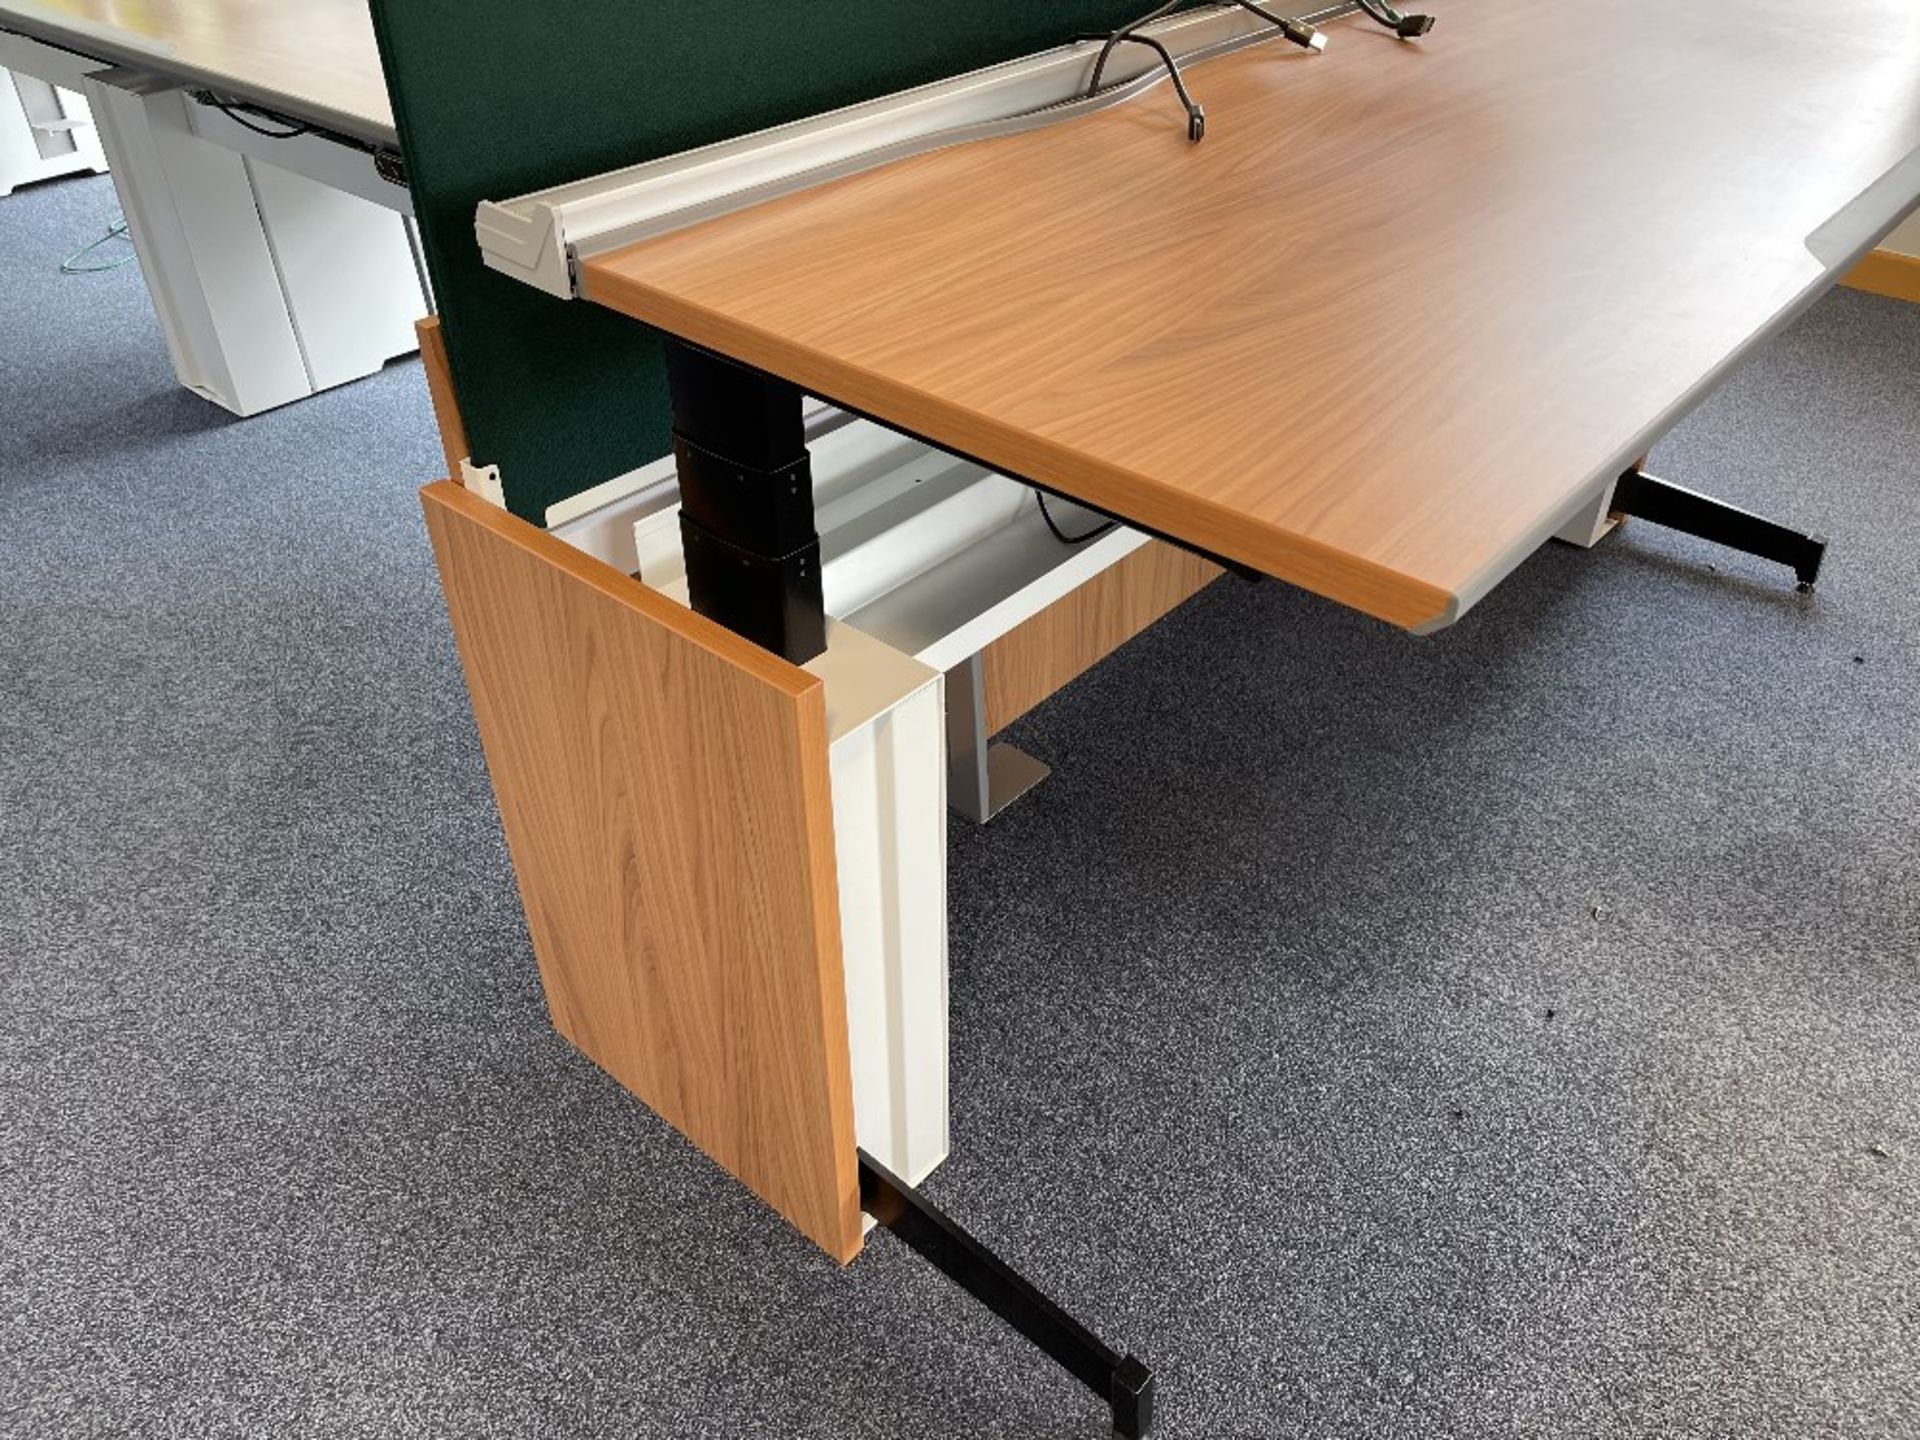 Single SBFI Aspect electric powered sit to stand desk with dual arm monitor arms, power module - Image 2 of 13